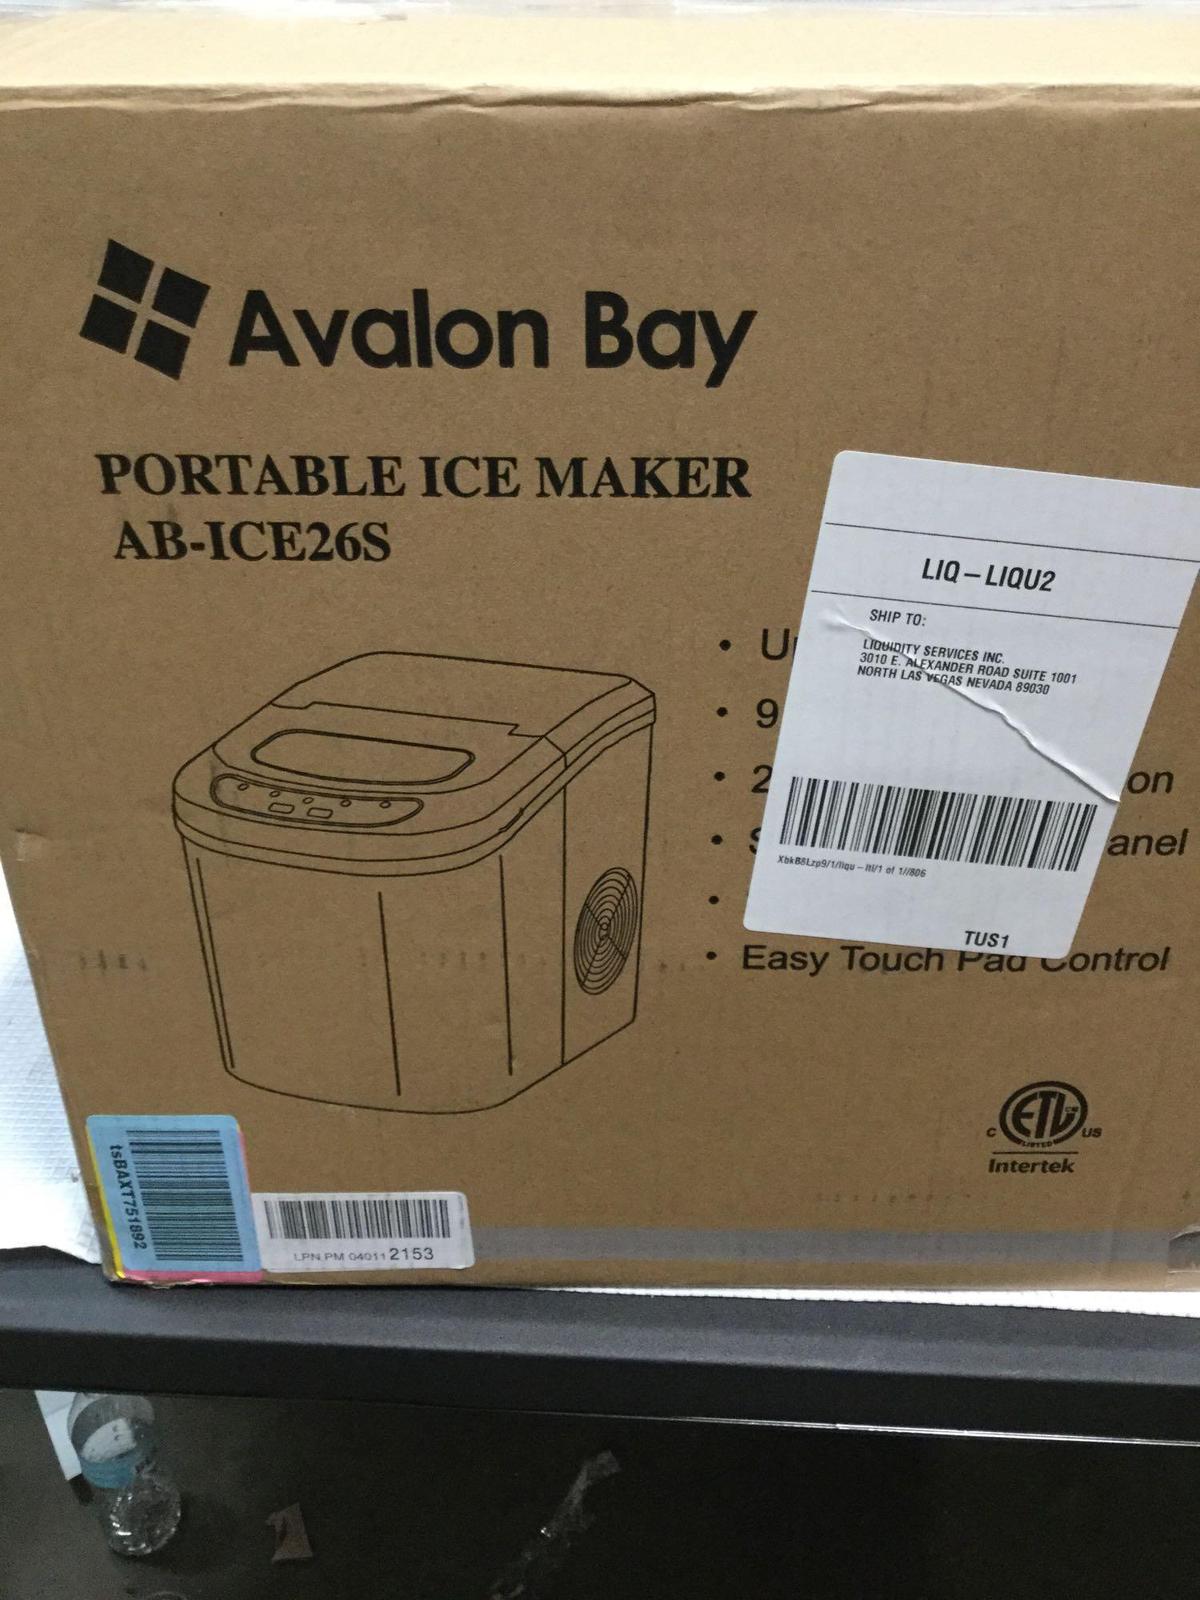 Avalon Bay AB-ICE26S Ice Maker Silver,$113 MSRP